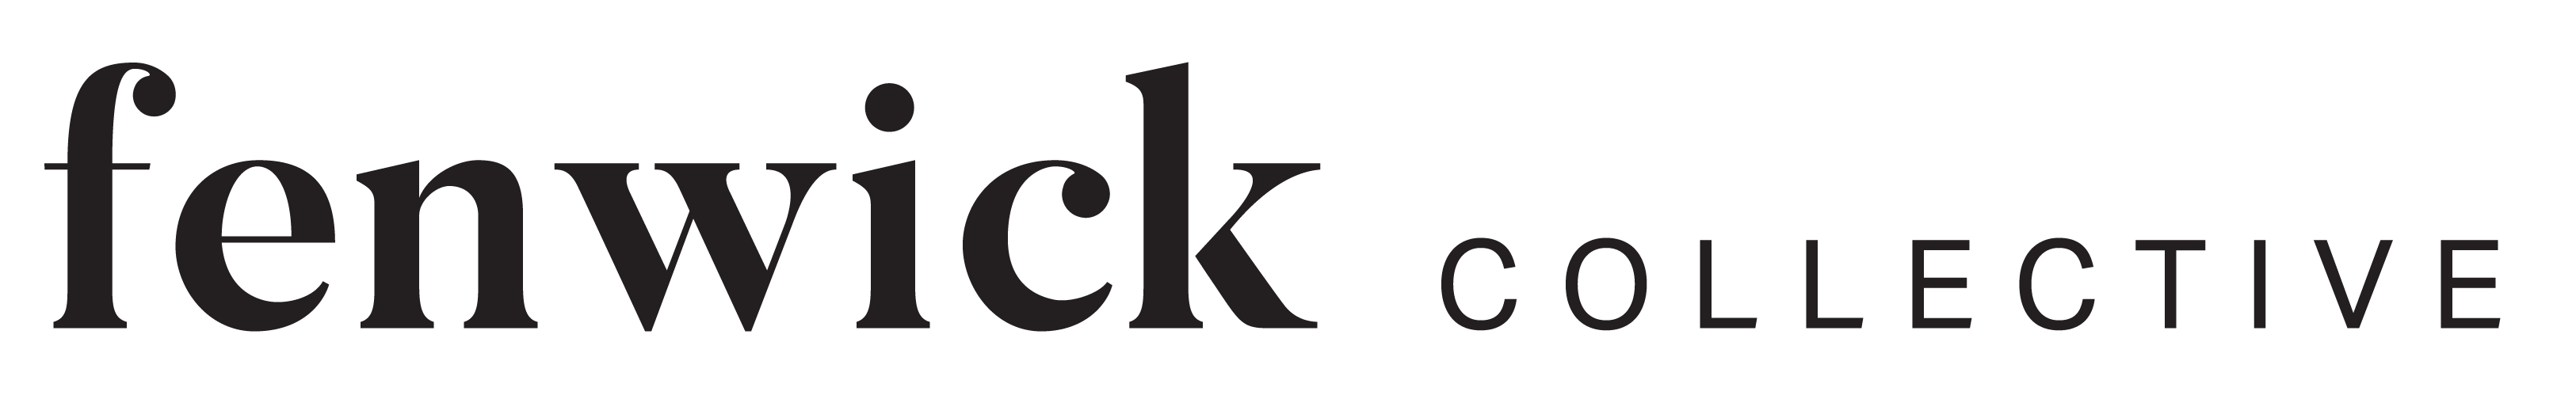 Fenwick Collective Logo PNG